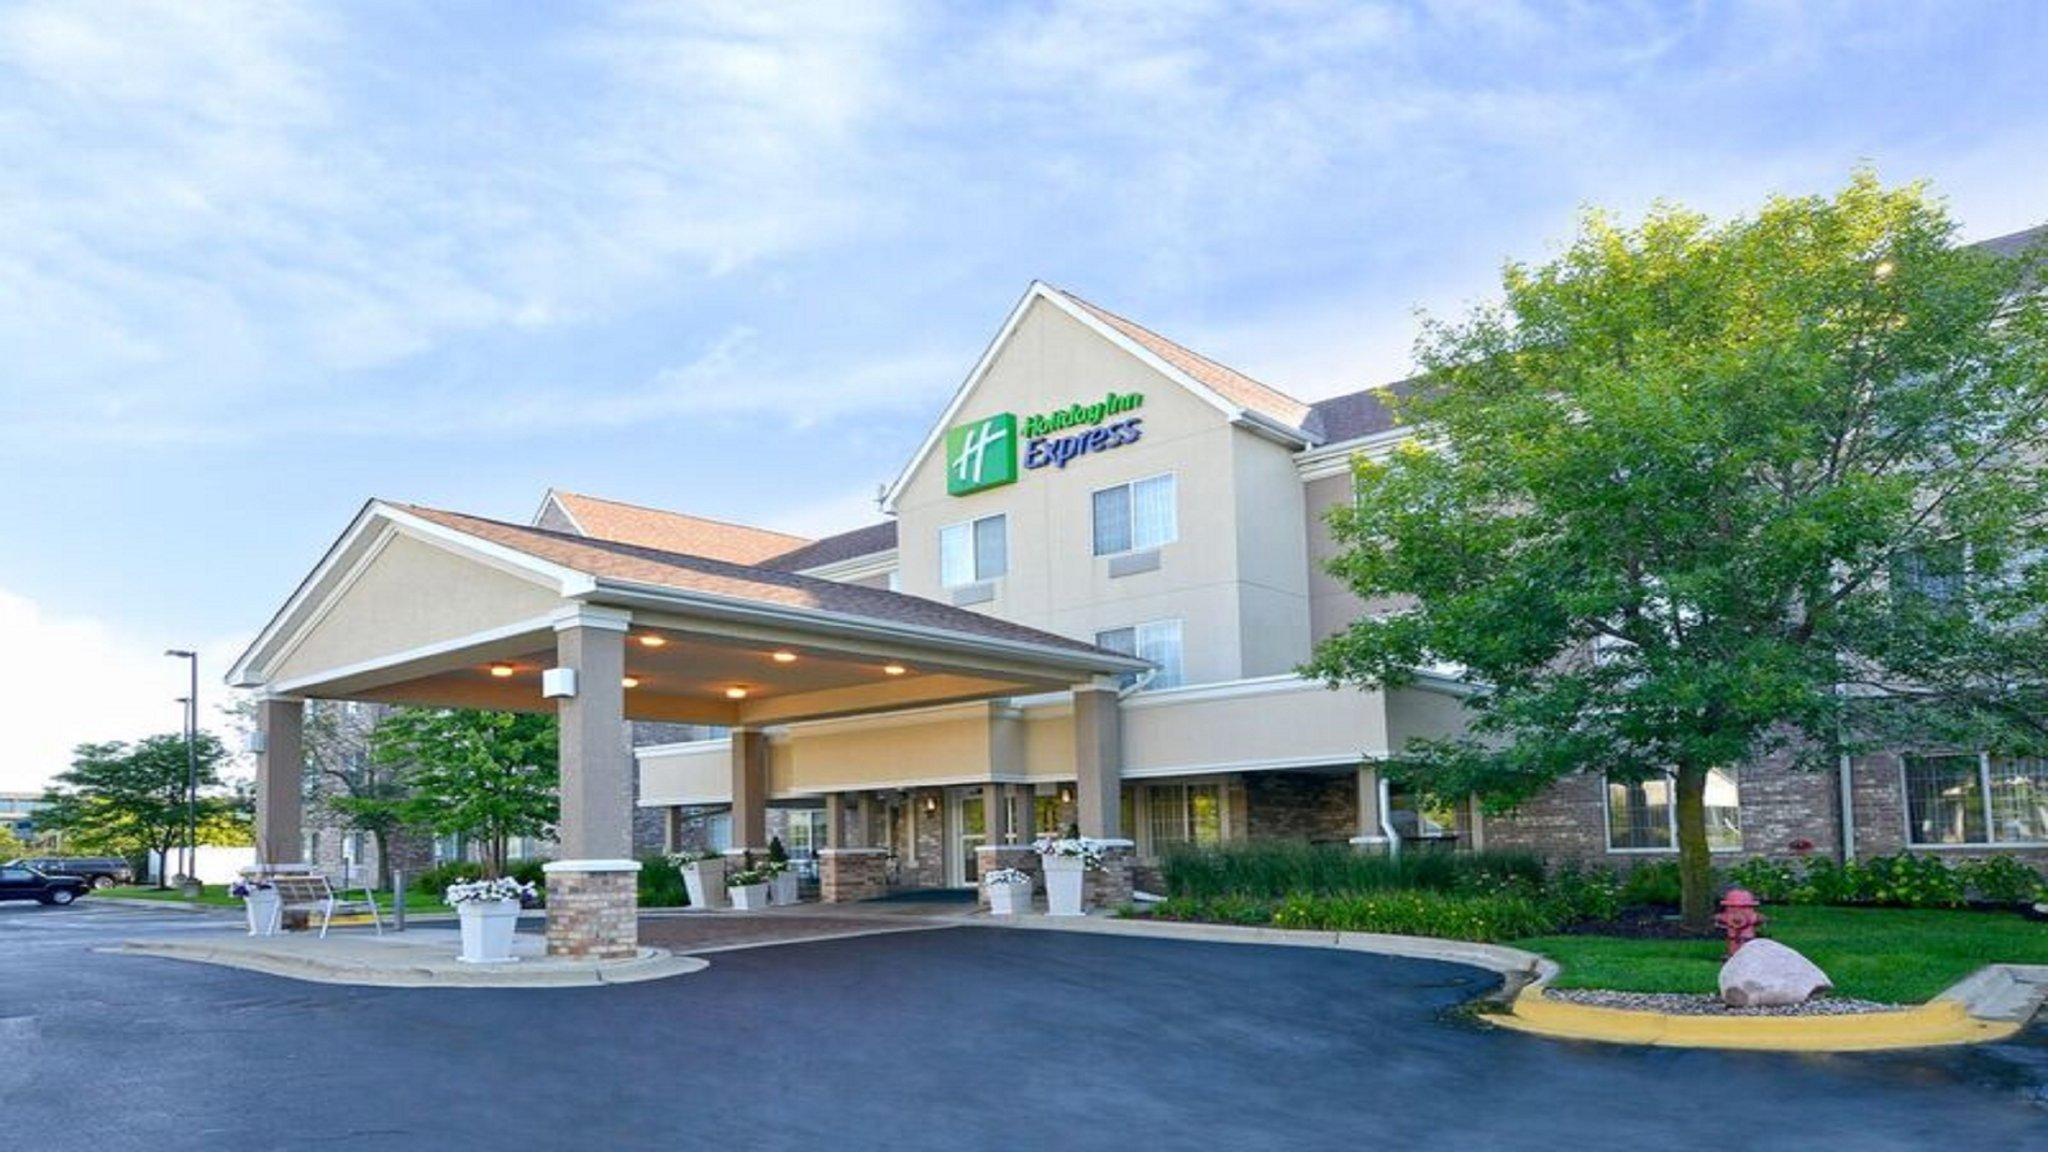 Holiday Inn Express & Suites Chicago-Deerfield/Lincolnshire in Riverwoods, IL